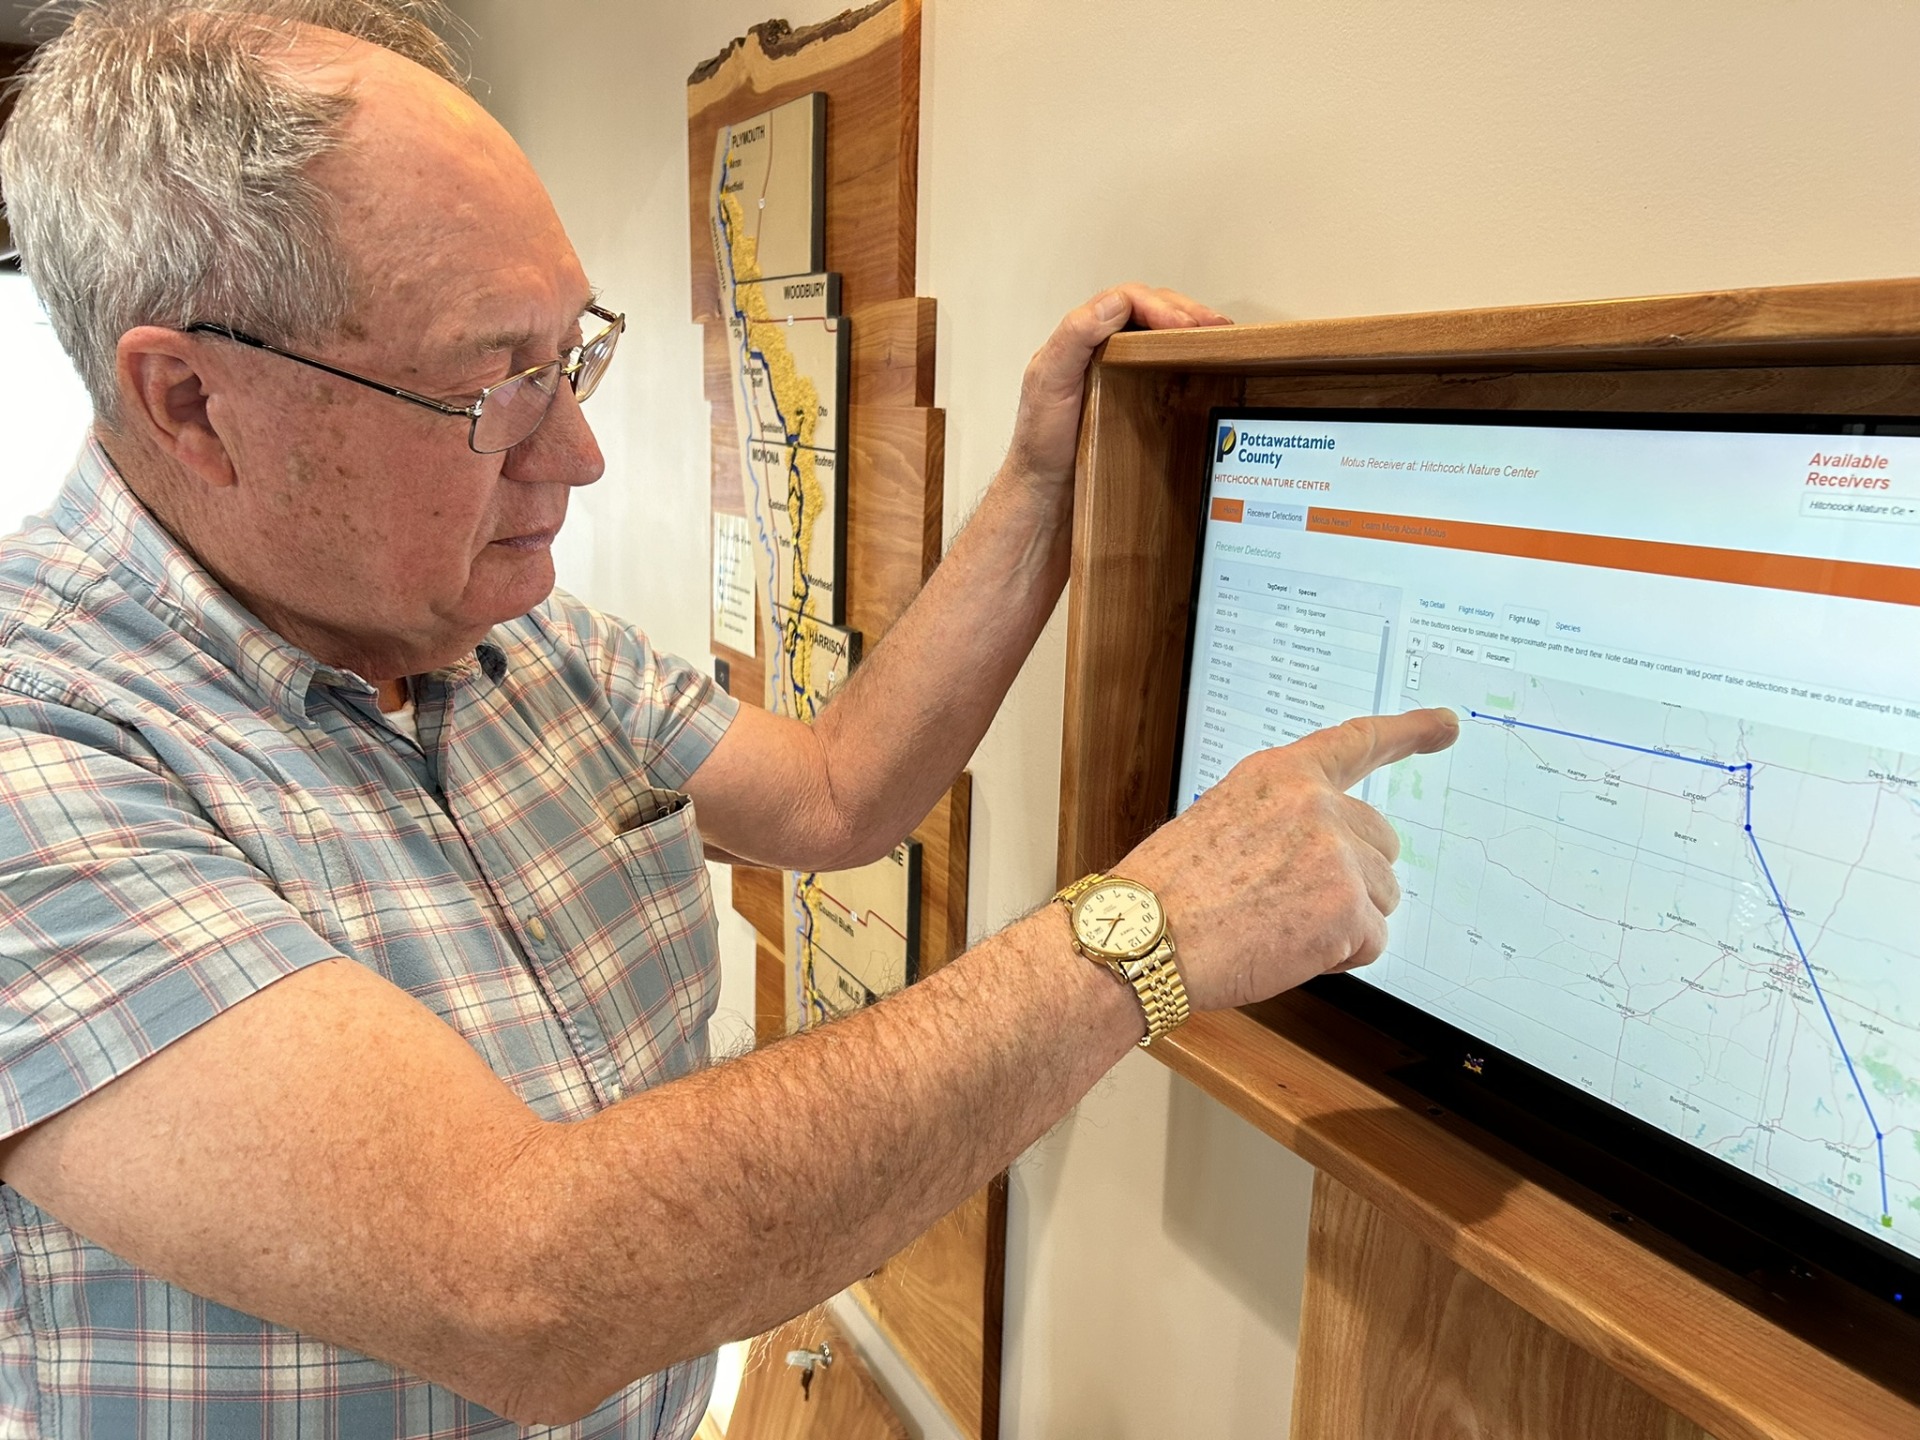 Glenn demonstrates how to use the new Motus display at Hitchcock Nature Center's Loess Hills Lodge.